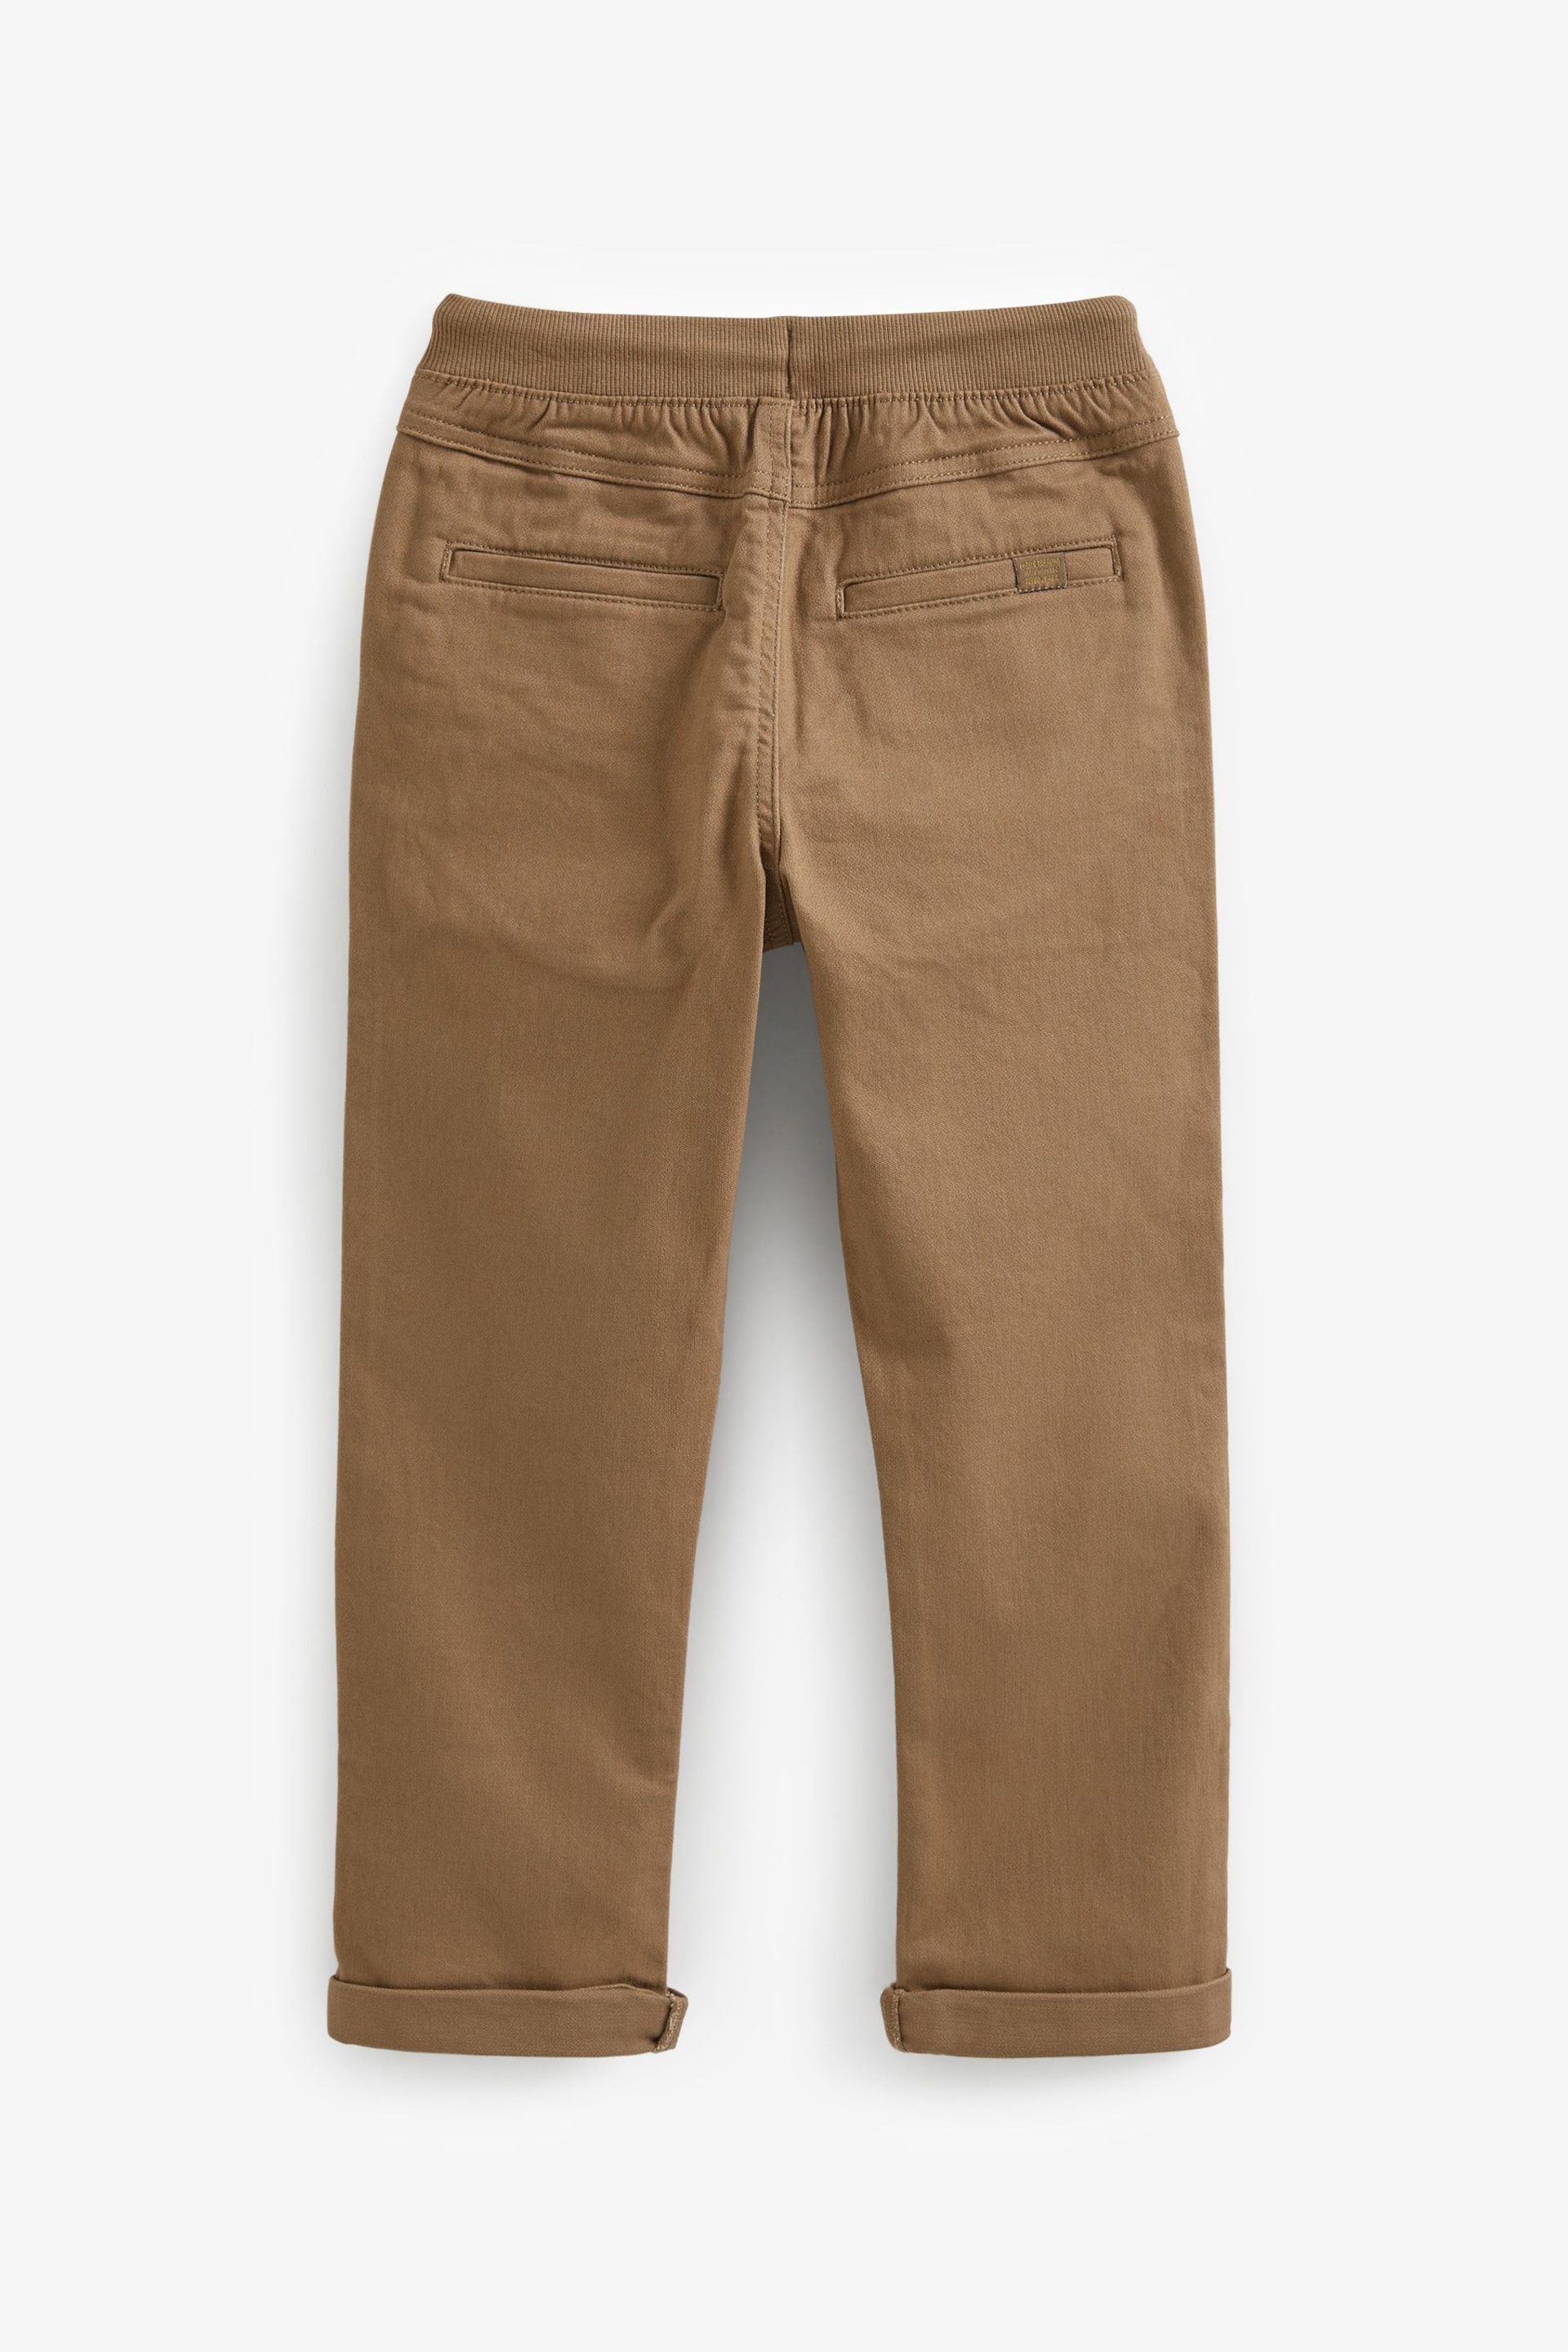 Tan Brown Regular Fit Rib Waist Pull-On Trousers (3-16yrs) - Image 2 of 2